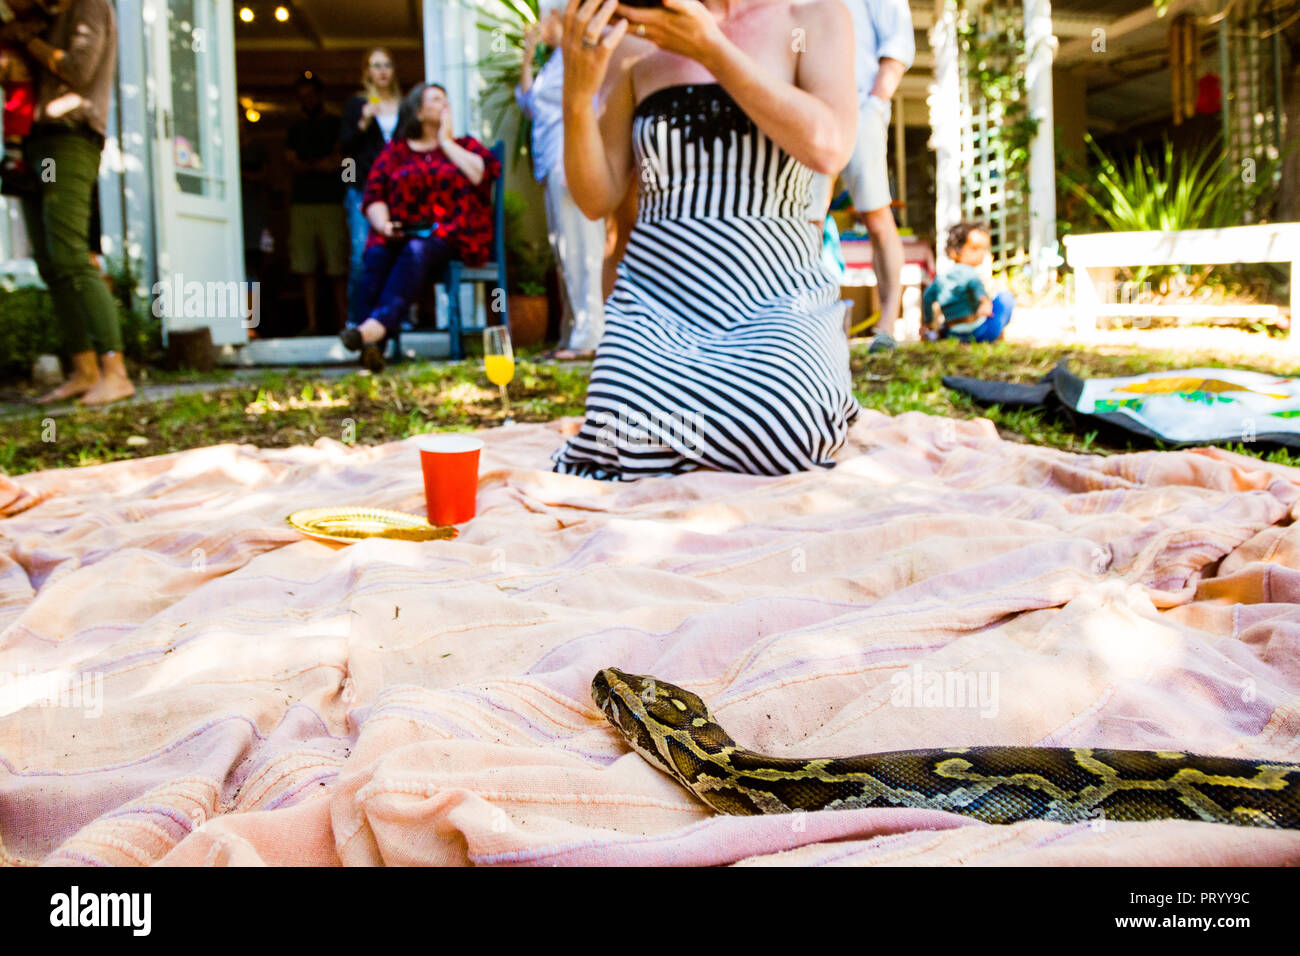 African Rock Python sliding on picnic blanket in front of a woman eating and people standing in the background on a party. Stock Photo